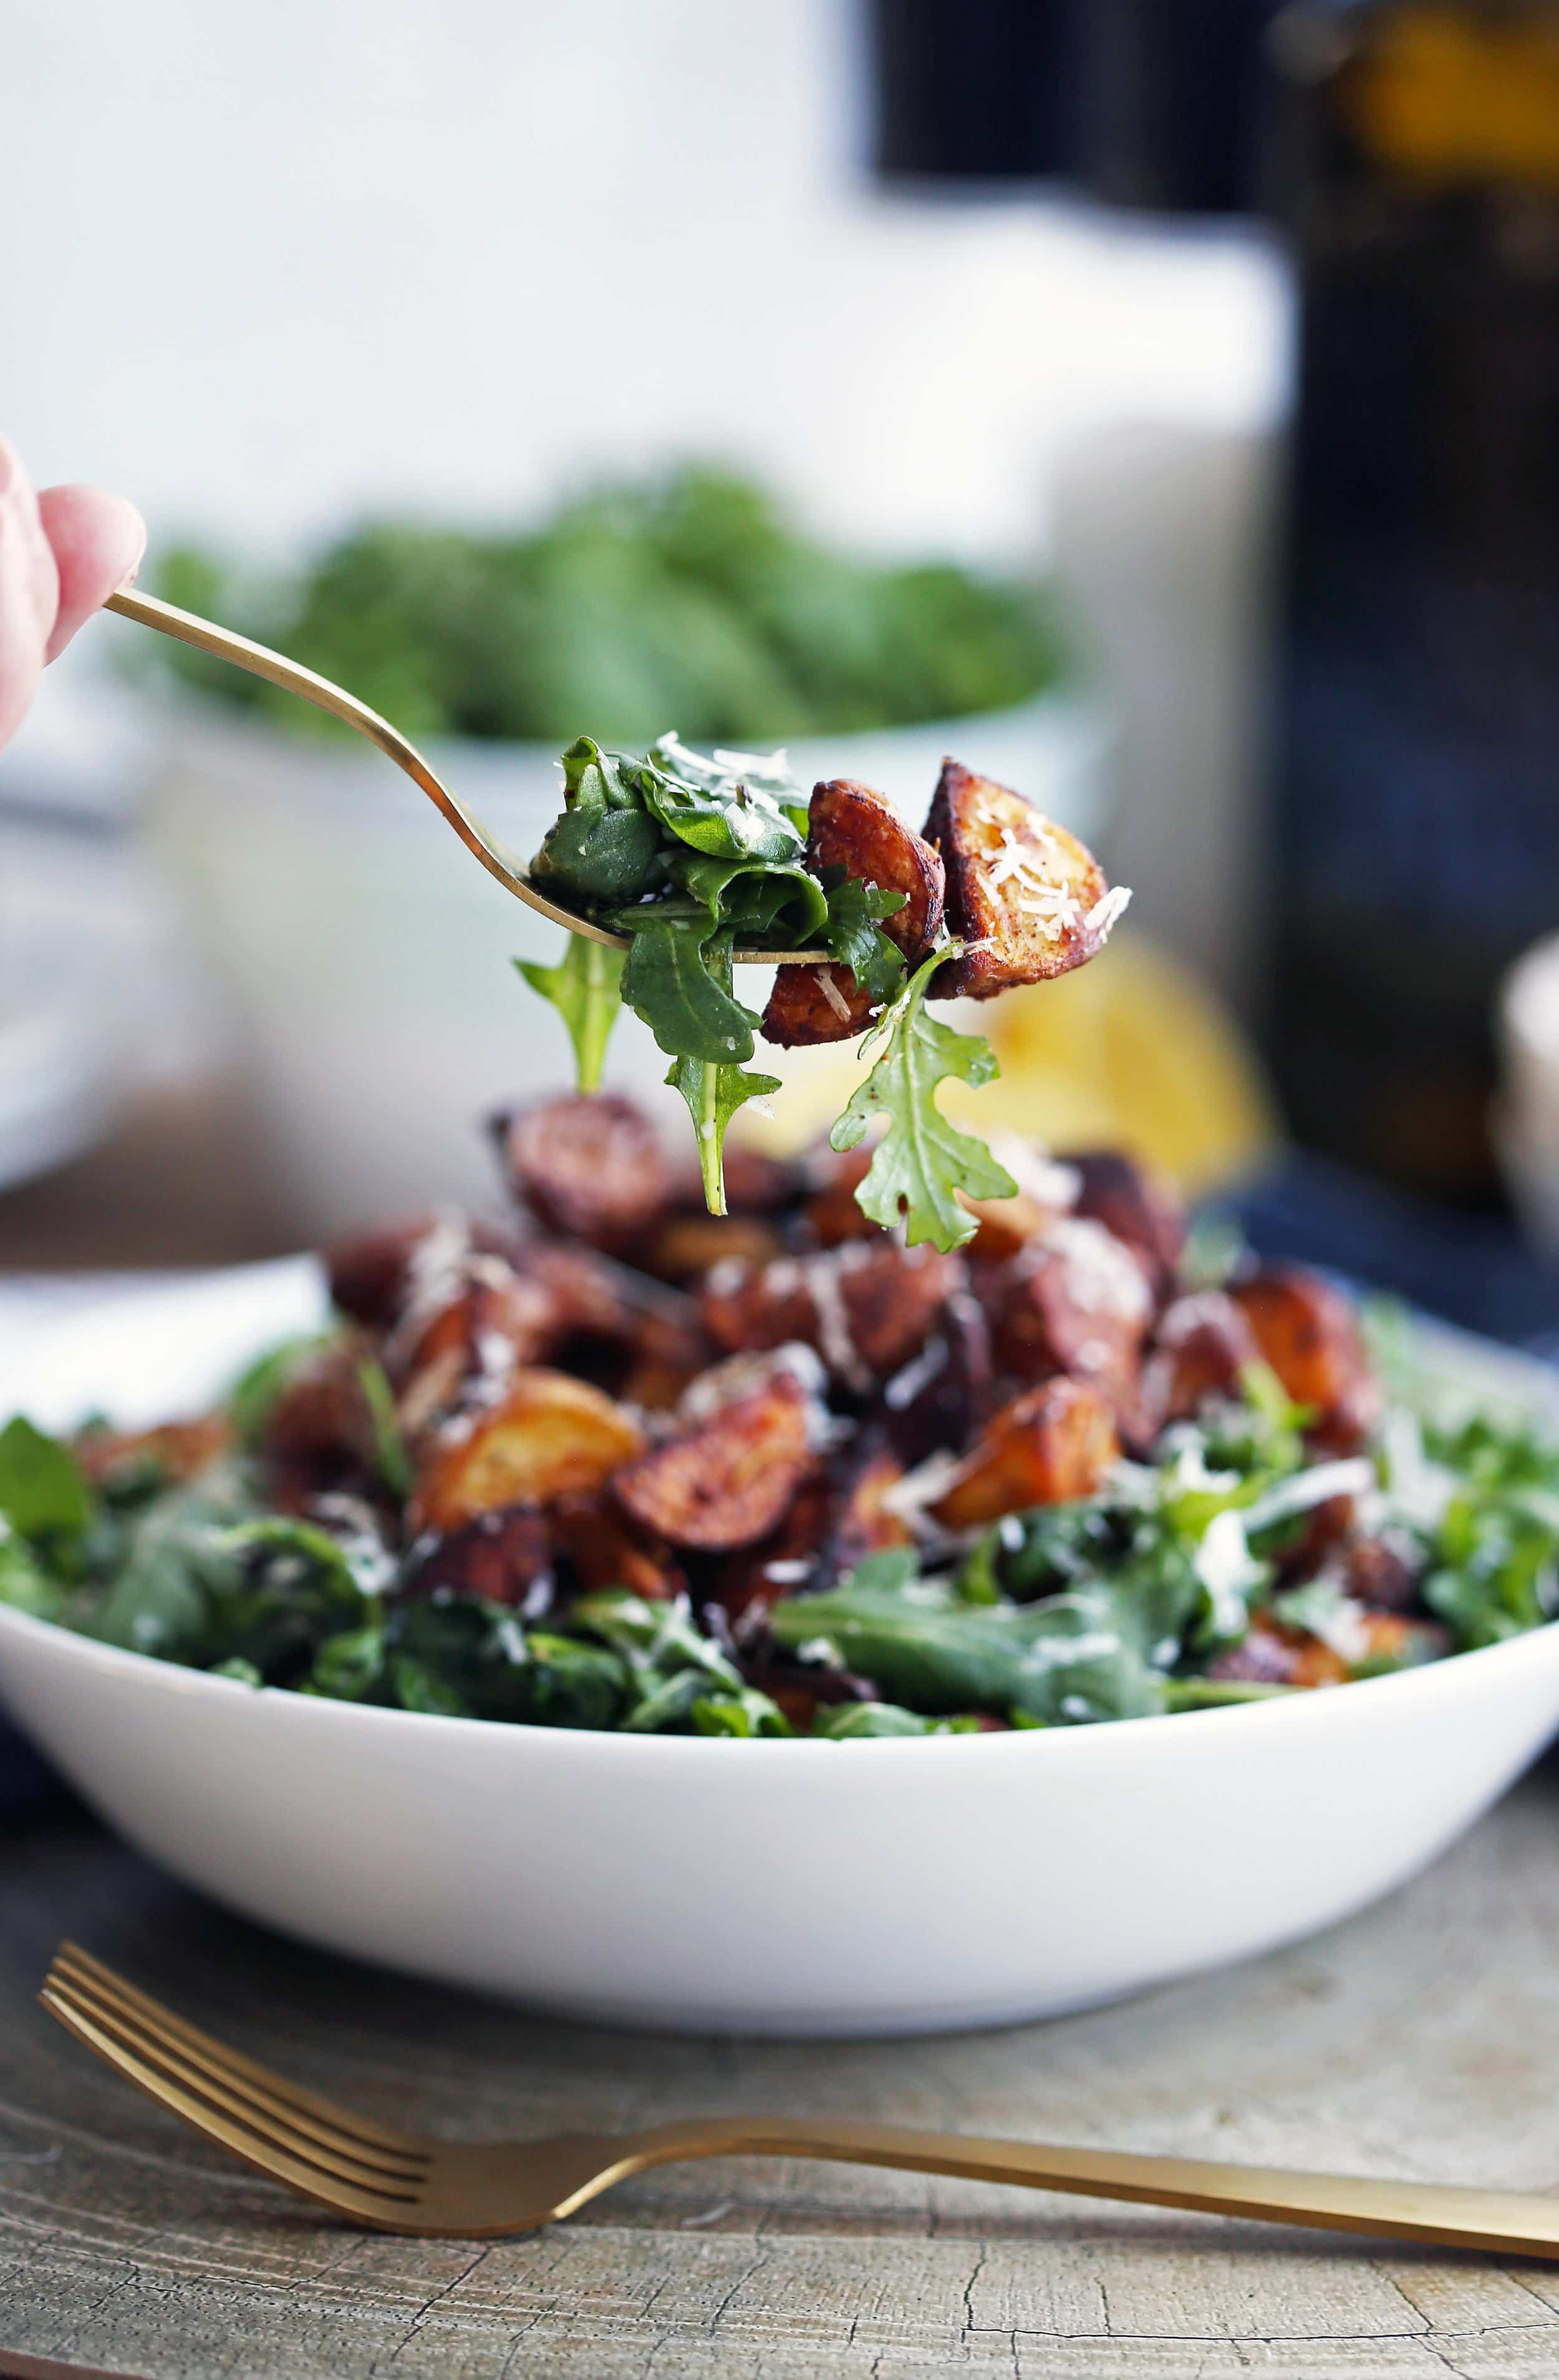 A fork holding roasted baby potato and baby arugula over a full bowl containing more of the same salad.